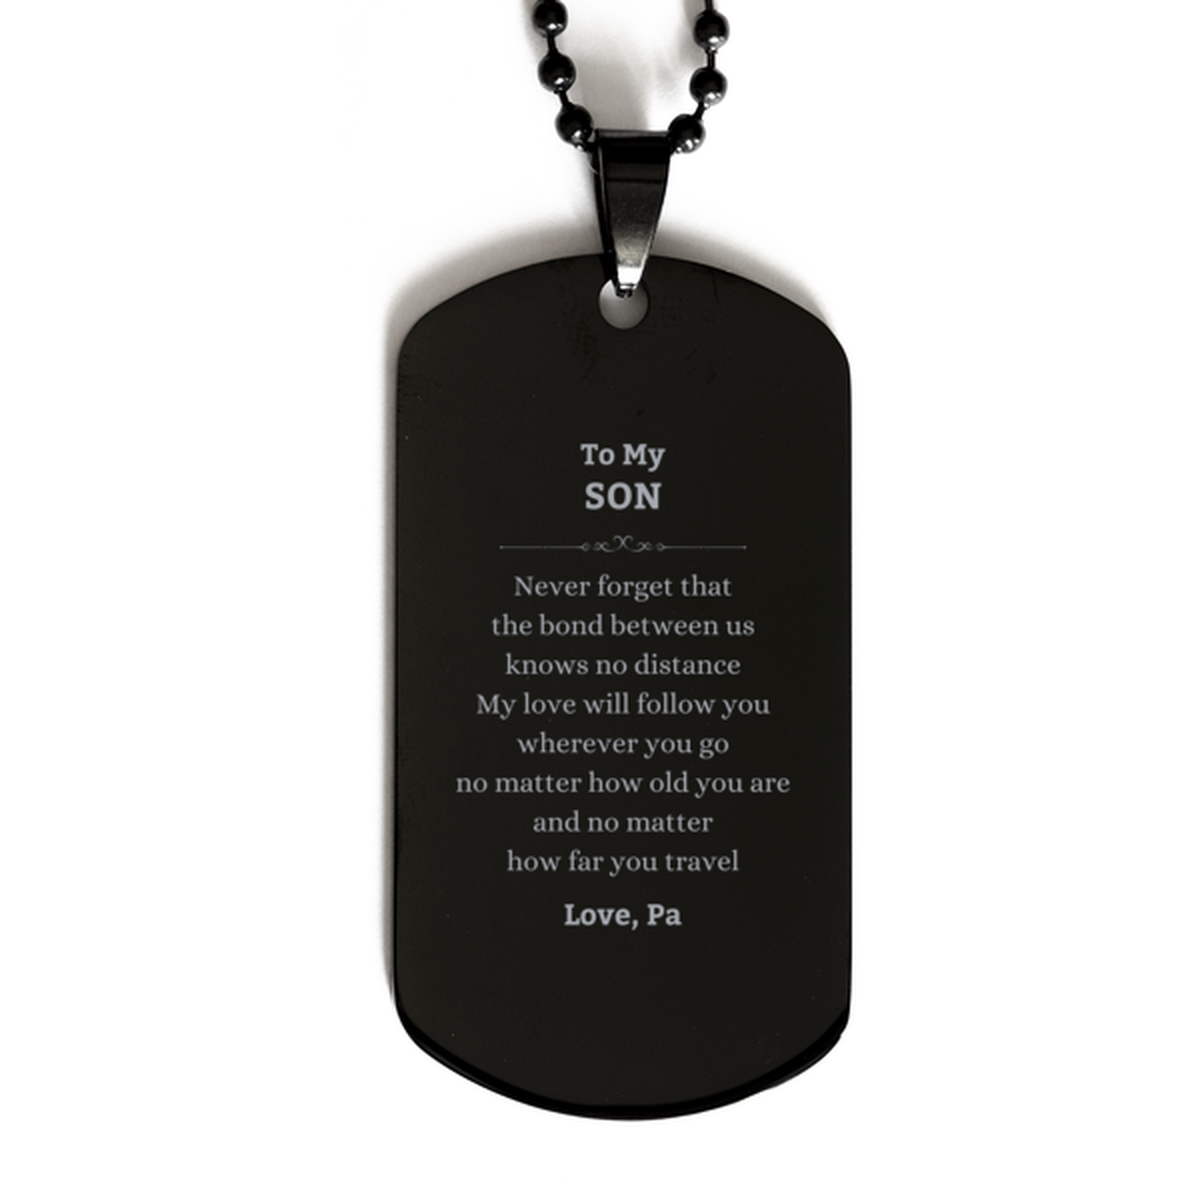 Son Birthday Gifts from Pa, Adjustable Black Dog Tag for Son Christmas Graduation Unique Gifts Son Never forget that the bond between us knows no distance. Love, Pa